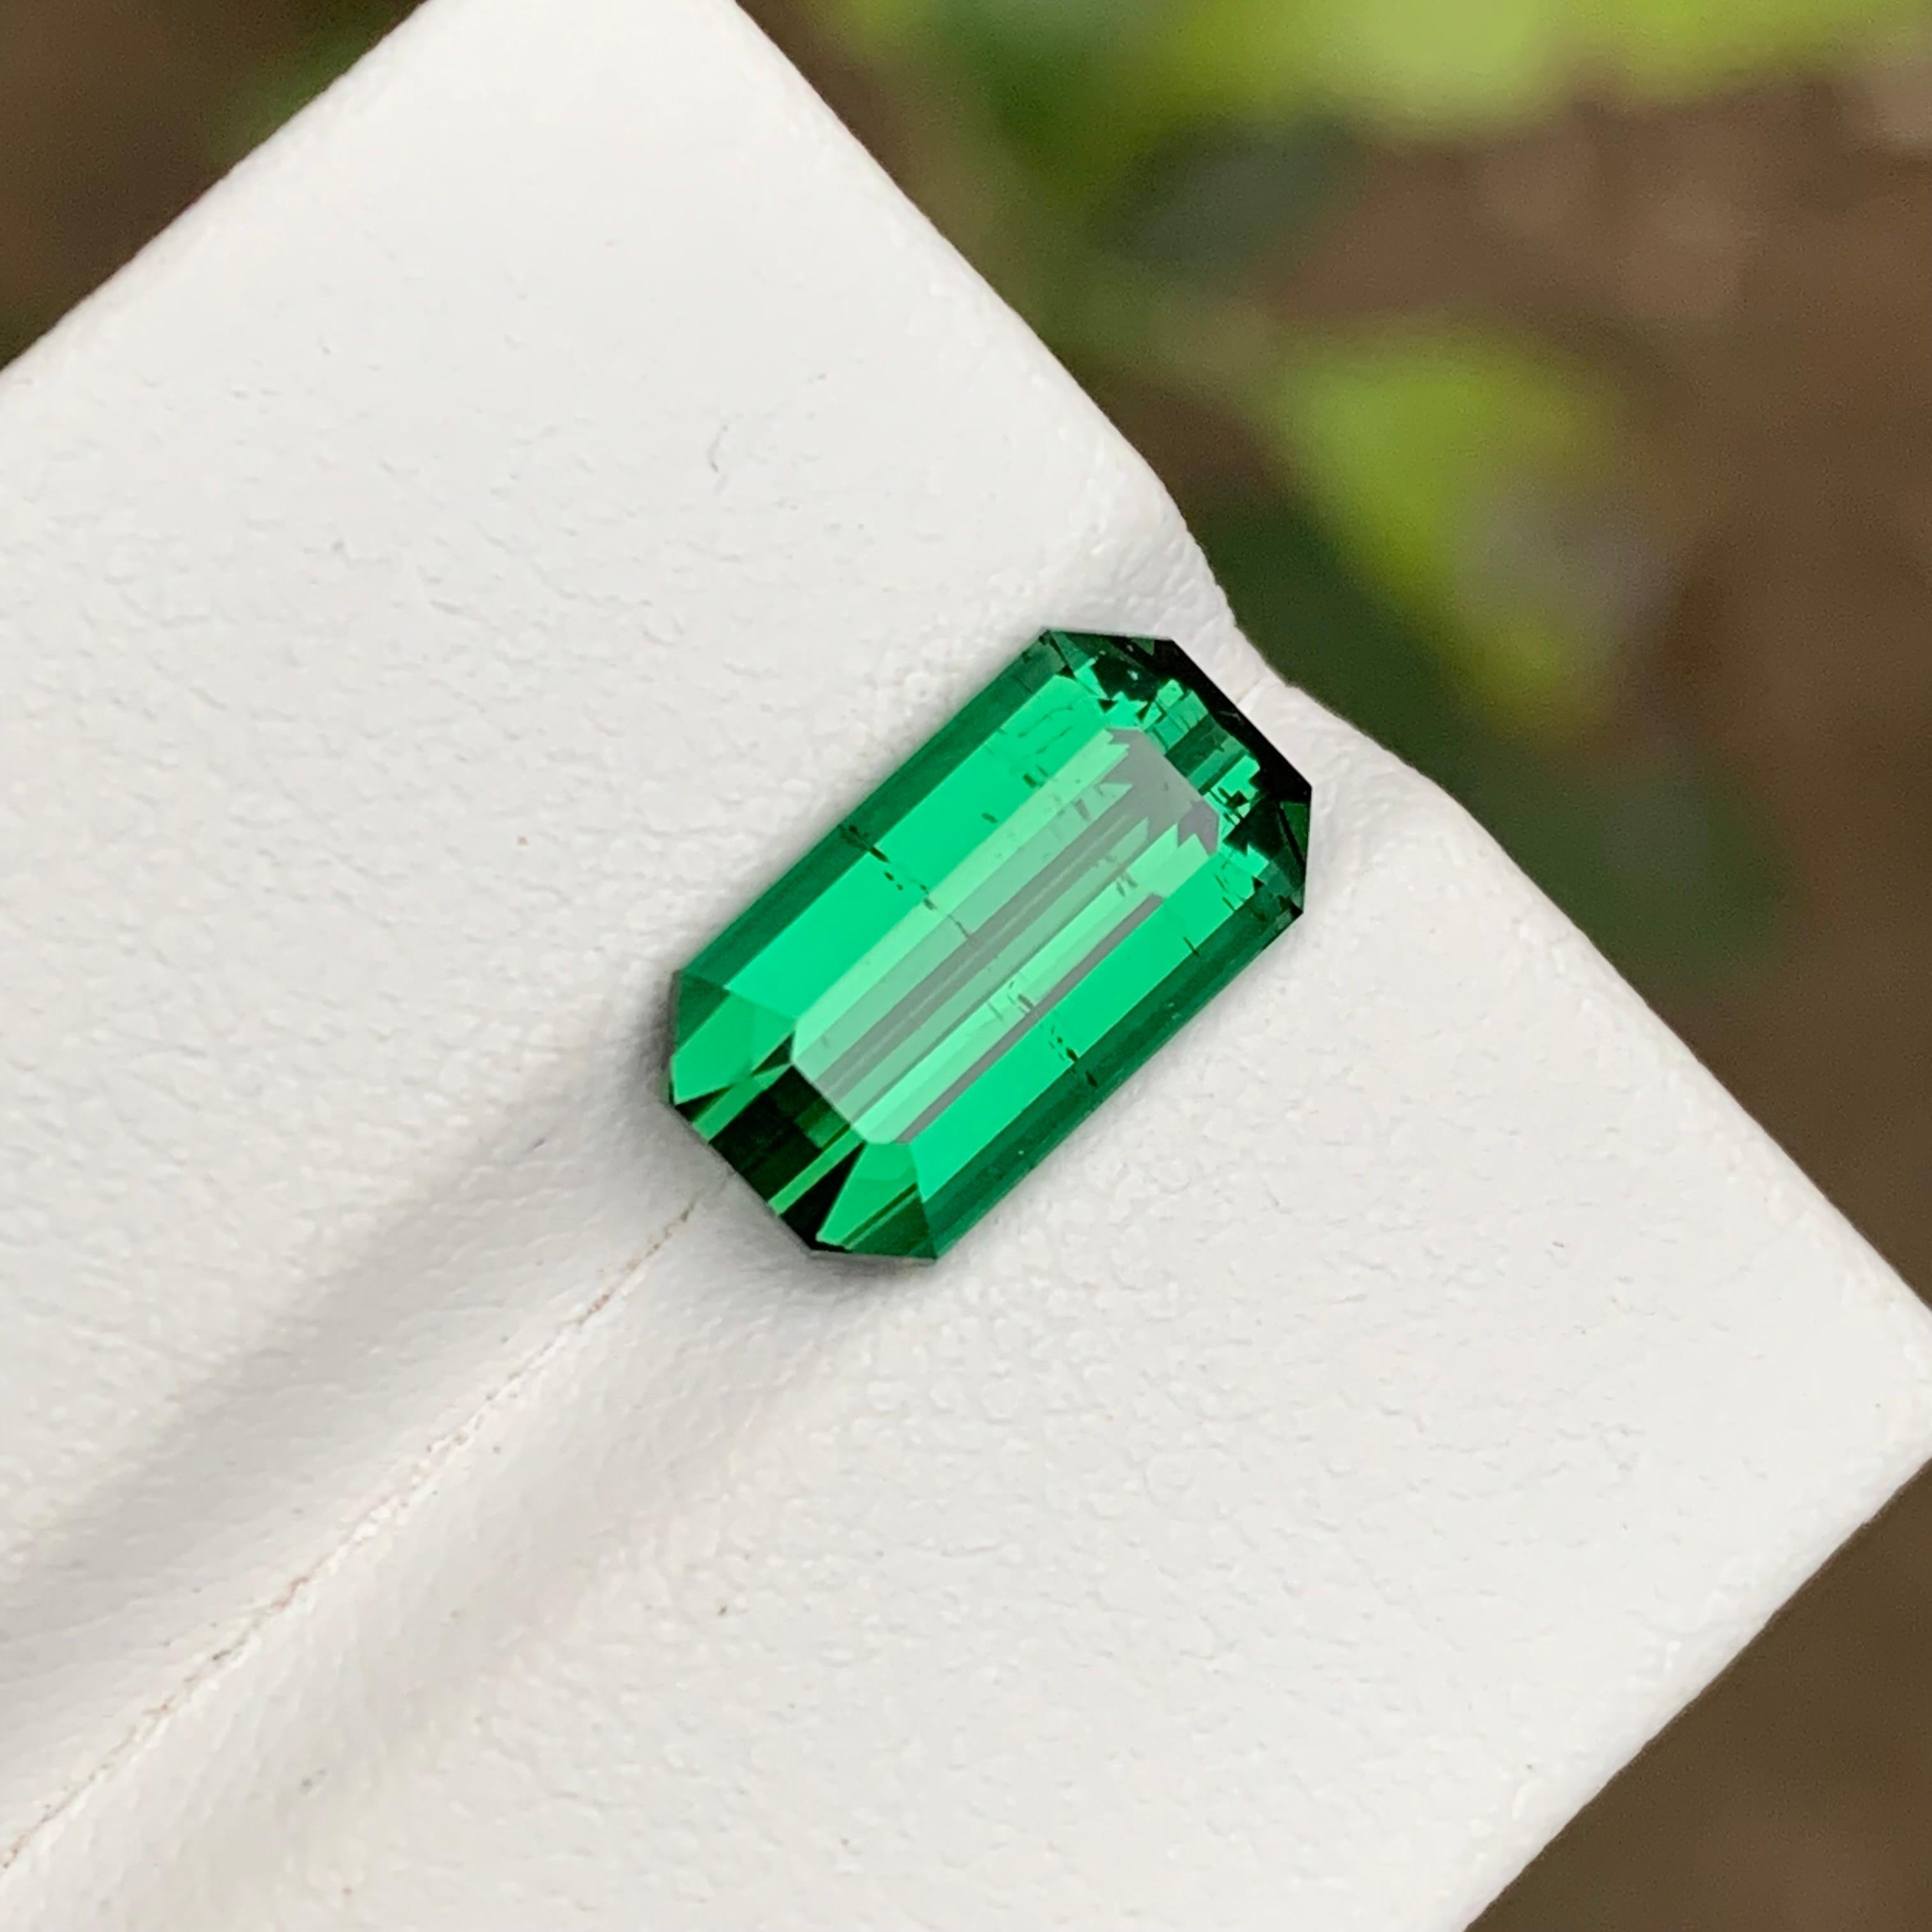 GEMSTONE TYPE: Tourmaline
PIECE(S): 1
WEIGHT: 3.85 Carat
SHAPE: Emerald
SIZE (MM): 11.79 x 6.63 x 5.42
COLOR: Green
CLARITY: Slightly Included 
TREATMENT: None
ORIGIN: Afghanistan
CERTIFICATE: On demand

Stunning 3.85 Carat Natural Green Tourmaline